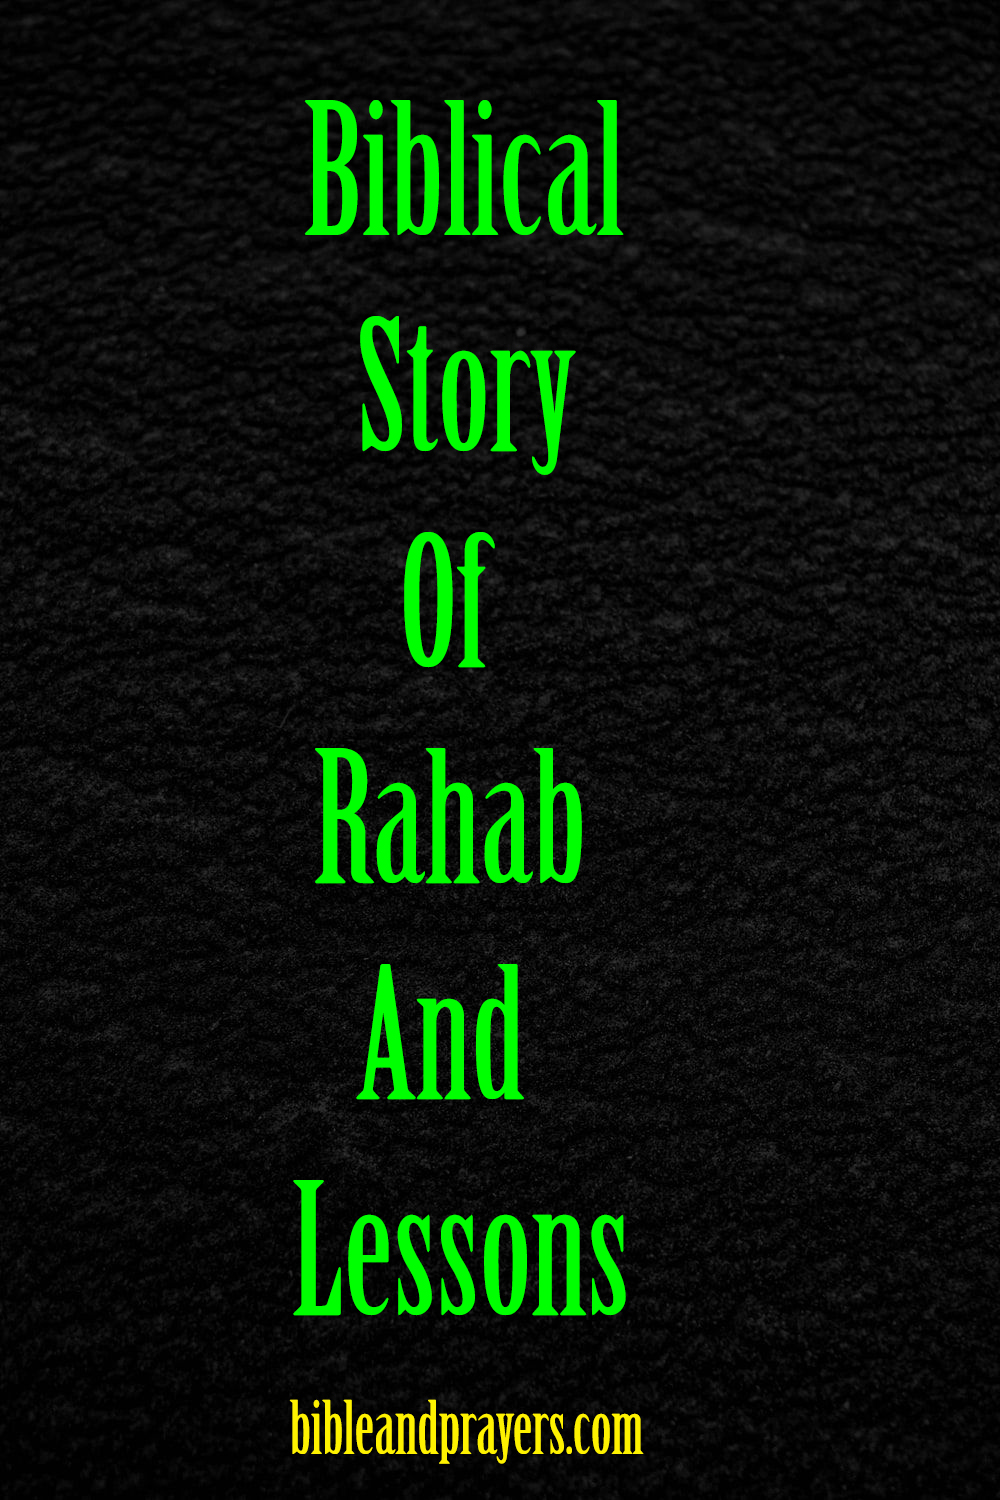 Biblical Story Of Rahab And Lessons